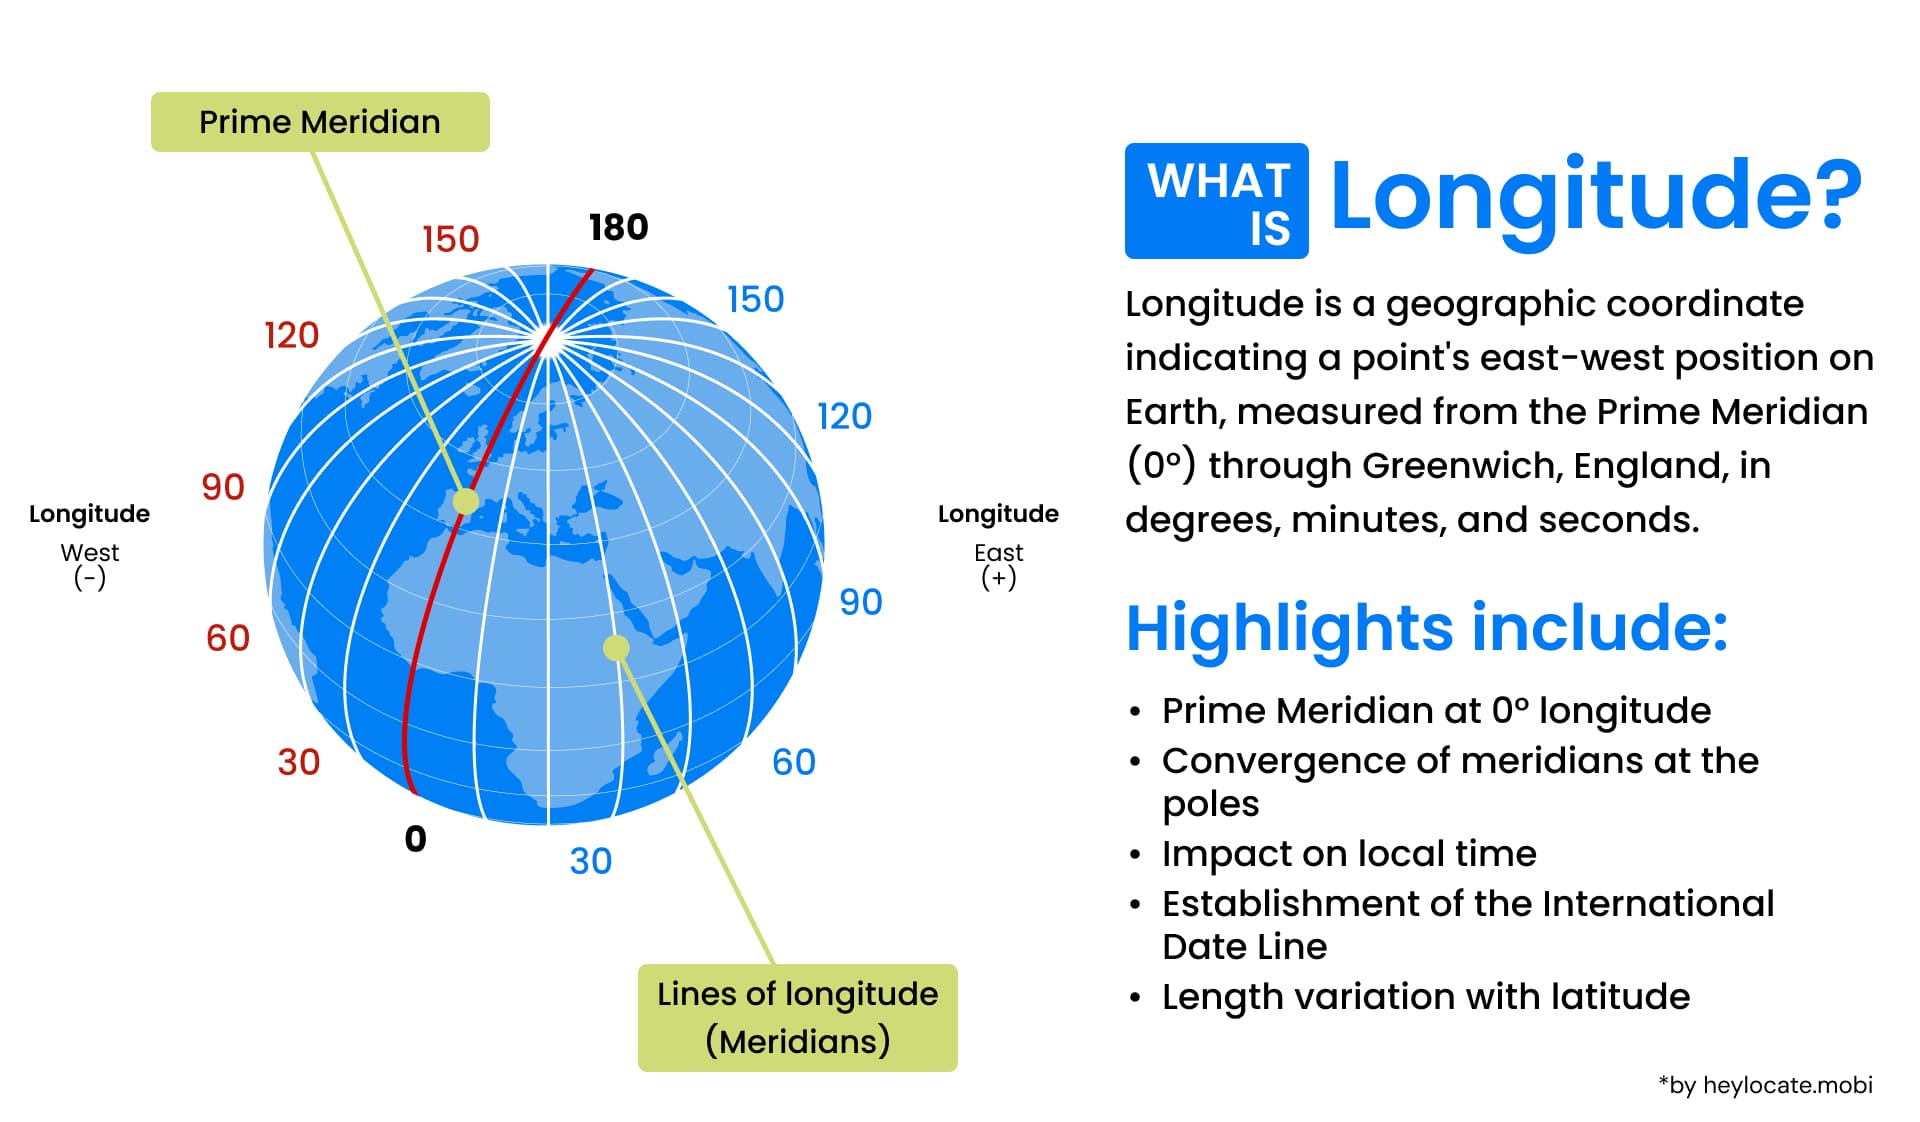 An illustrated guide explaining what longitude is by visualizing degrees, meridian, and longitude on a globe